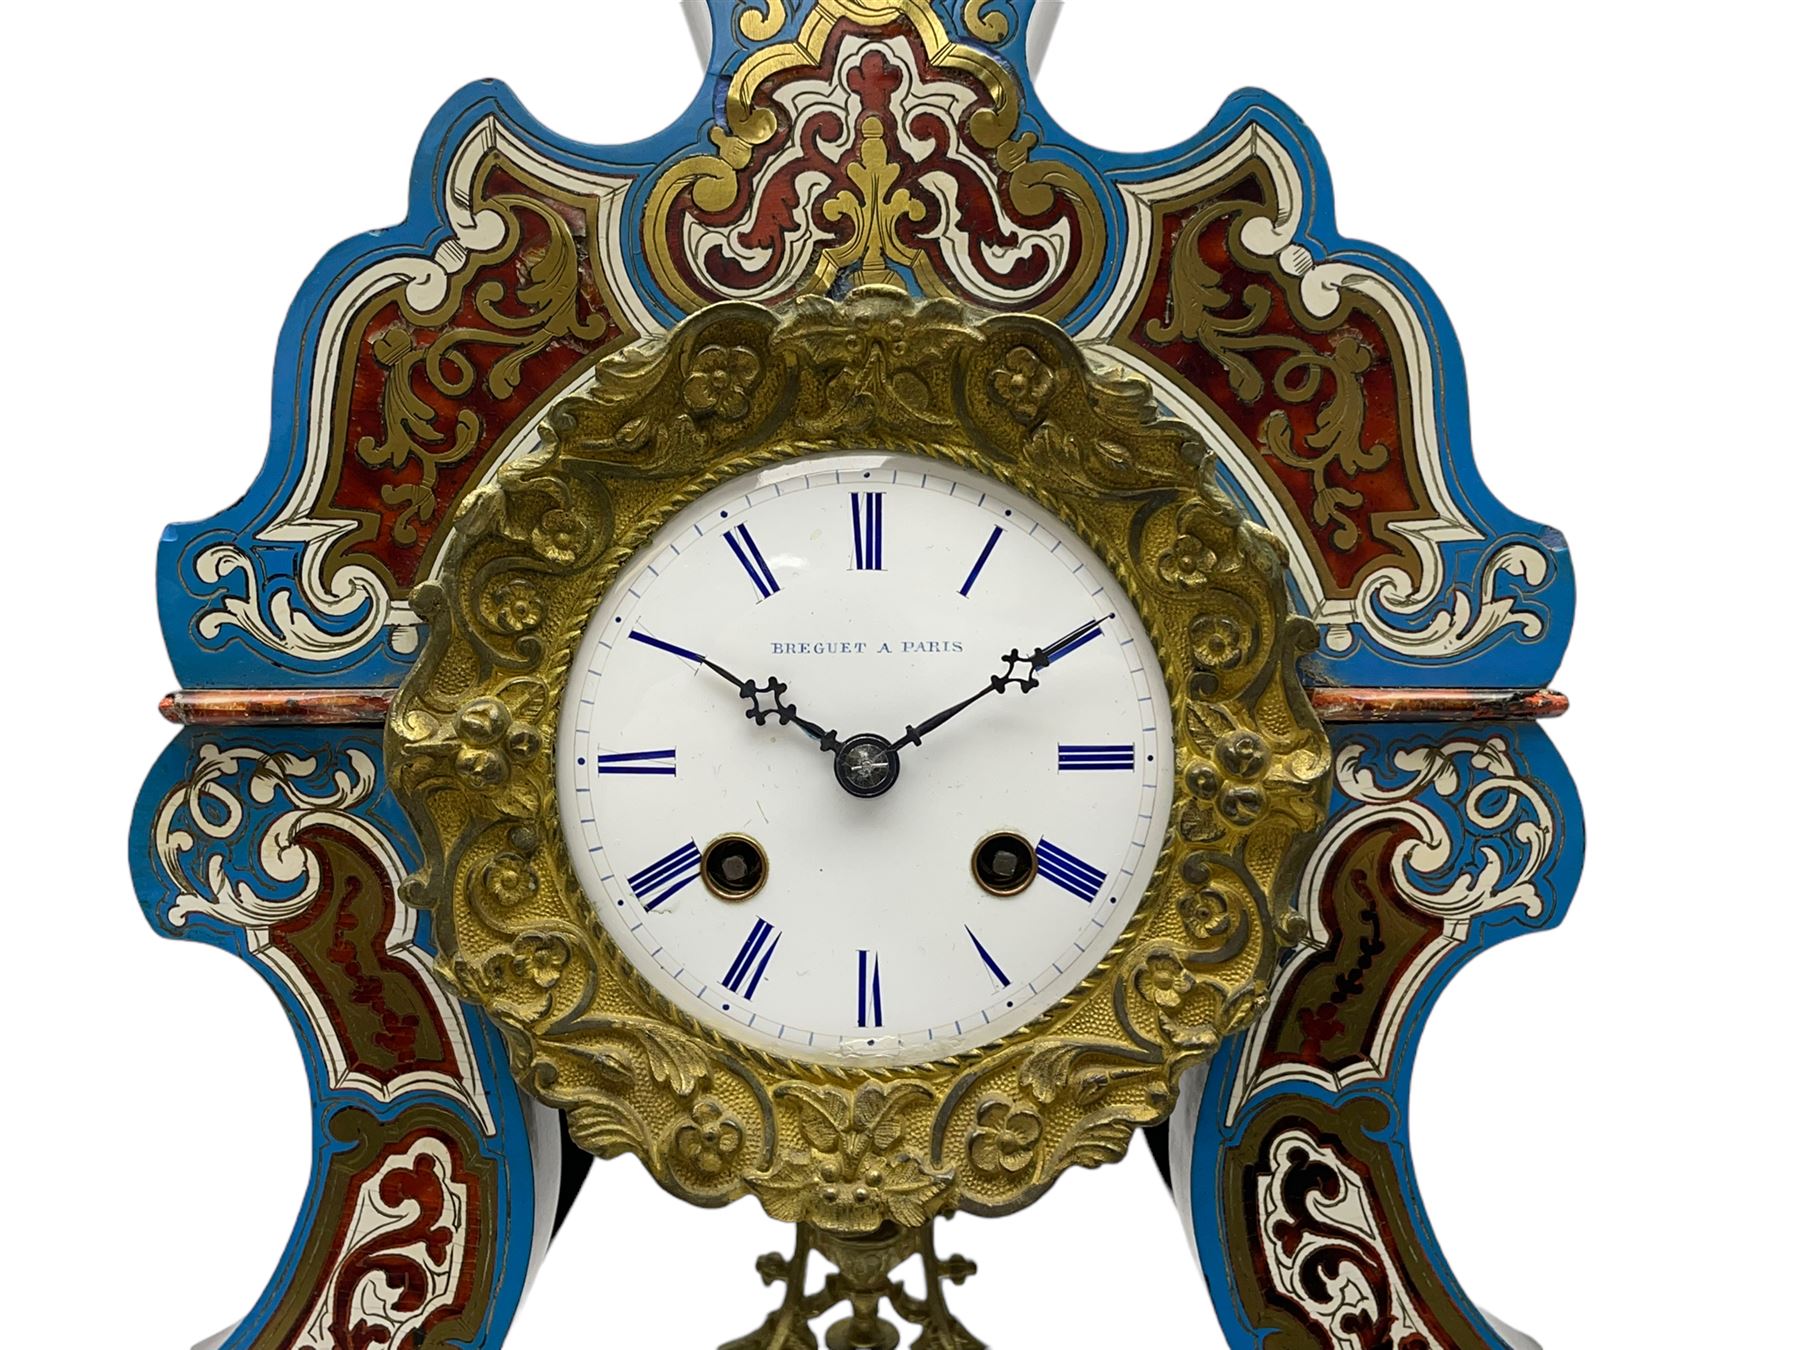 Breguet A Paris - Mid-19th century 8-day French portico clock - Image 6 of 8